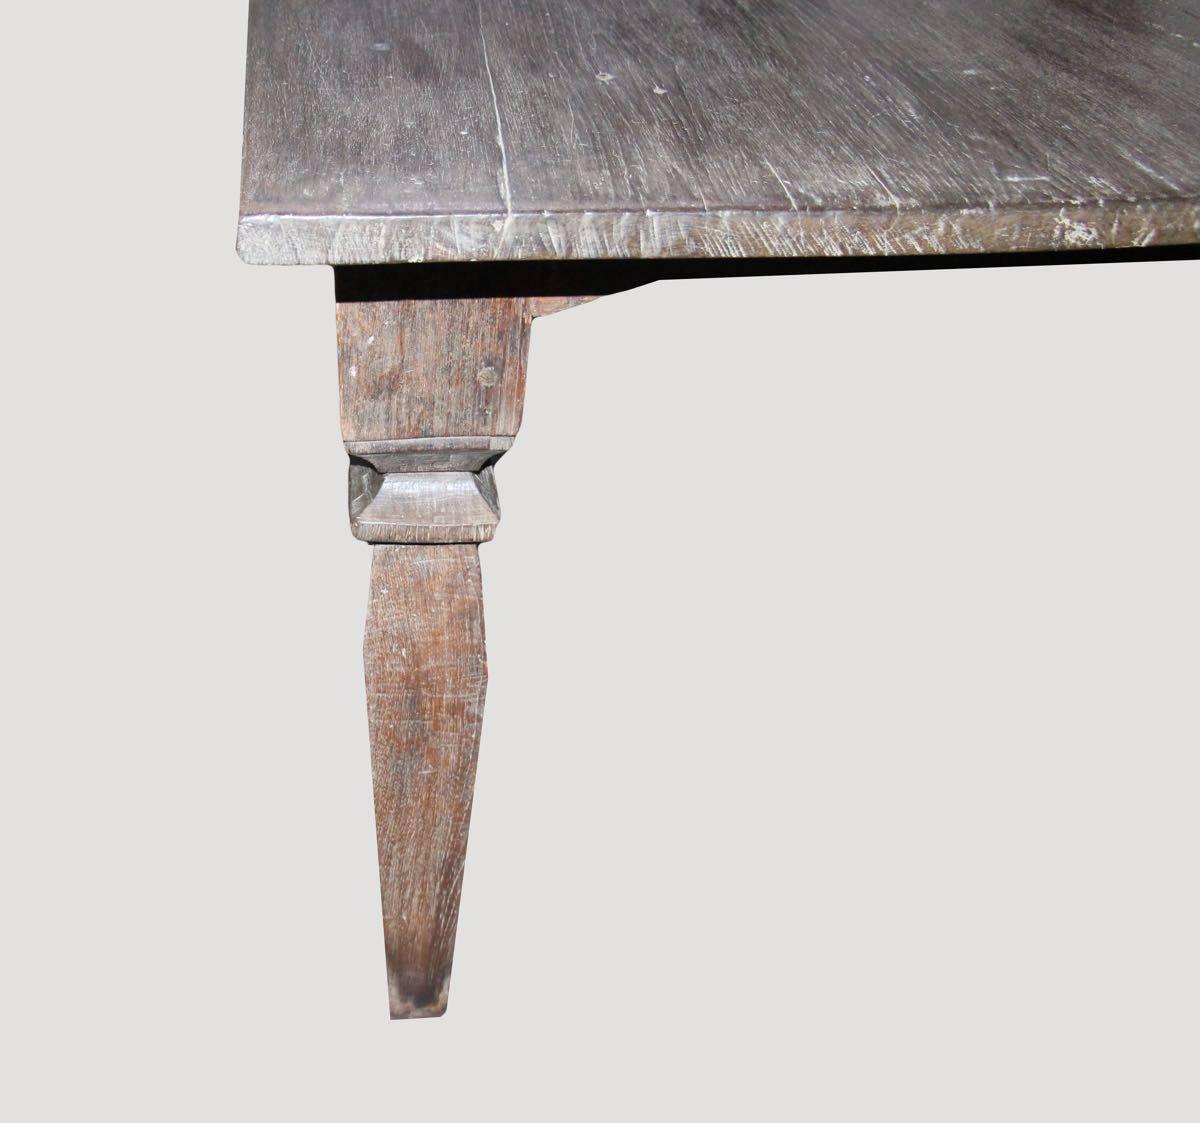 Beautiful patina on this stunning Andrianna Shamaris teak wood dining table with hand-carved legs. The top consists of two slabs.

This side table was sourced in the spirit of wabi-sabi, a Japanese philosophy that beauty can be found in imperfection